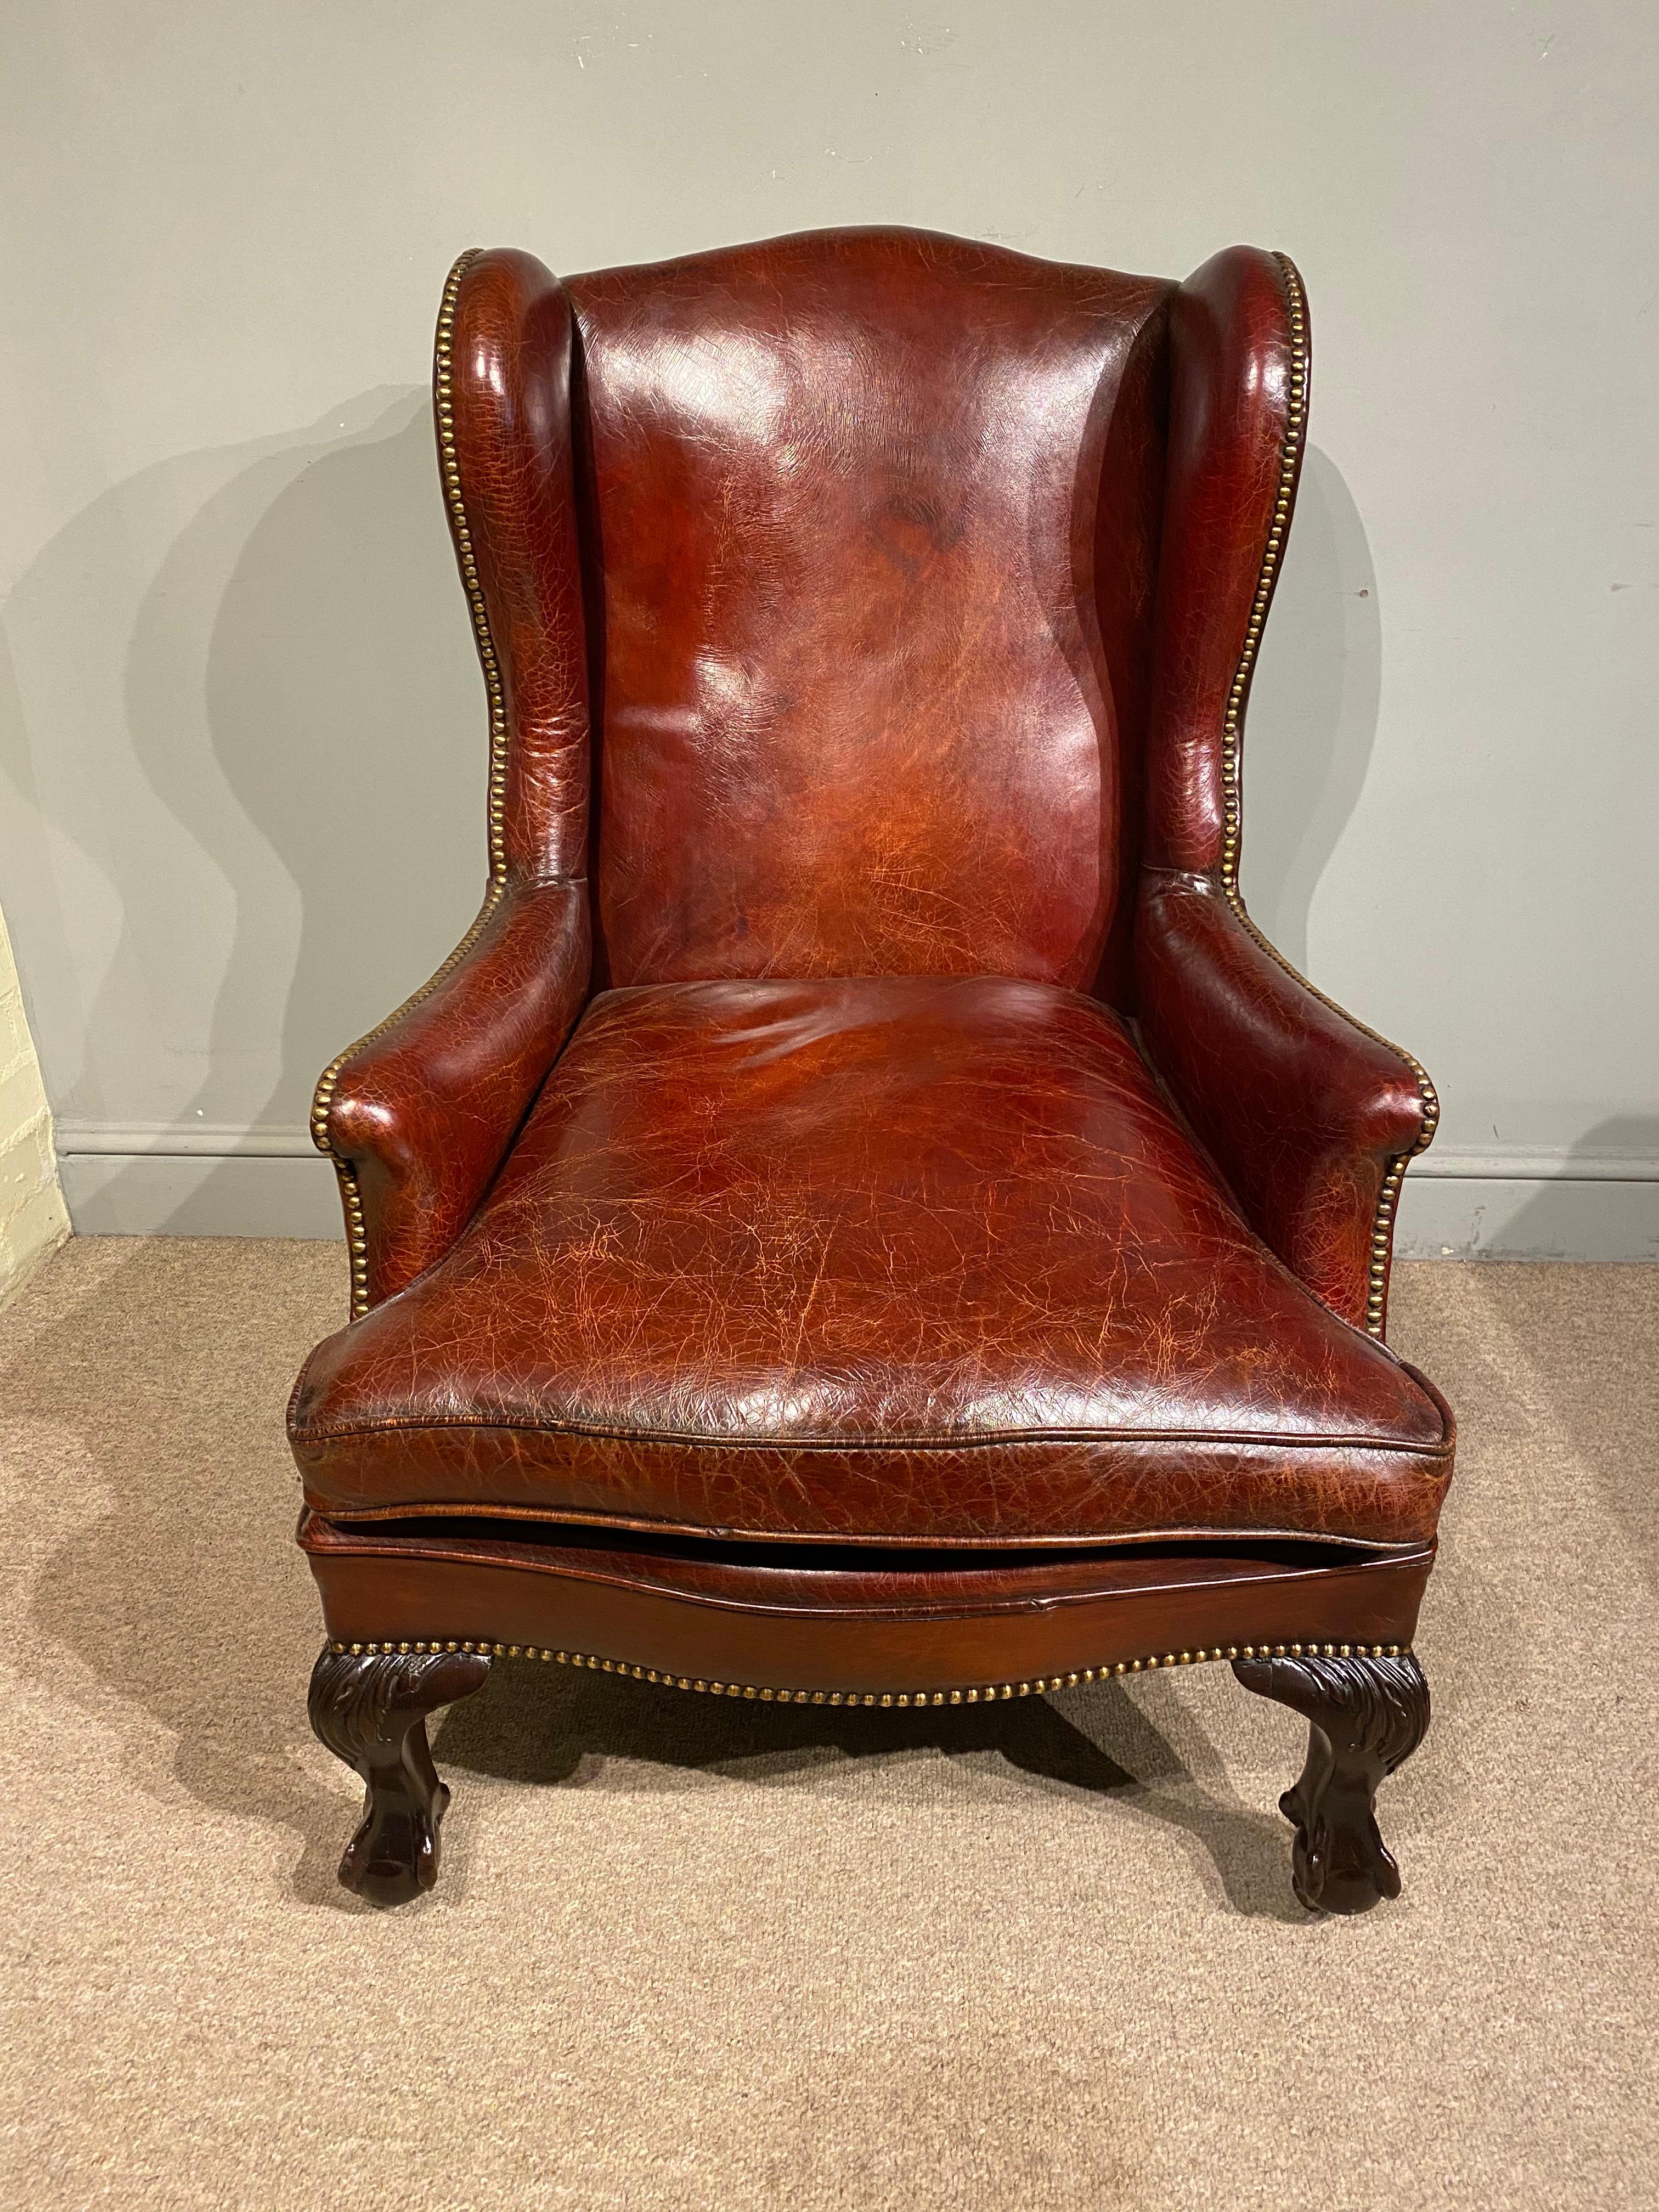 This is a stunning quality 19th Century Georgian Style Gentleman's Library Chair, made by one of England's finest furniture makers of the Victorian period - Lamb's of Manchester. The beautifully shaped leather and brass studded wing back chair has a